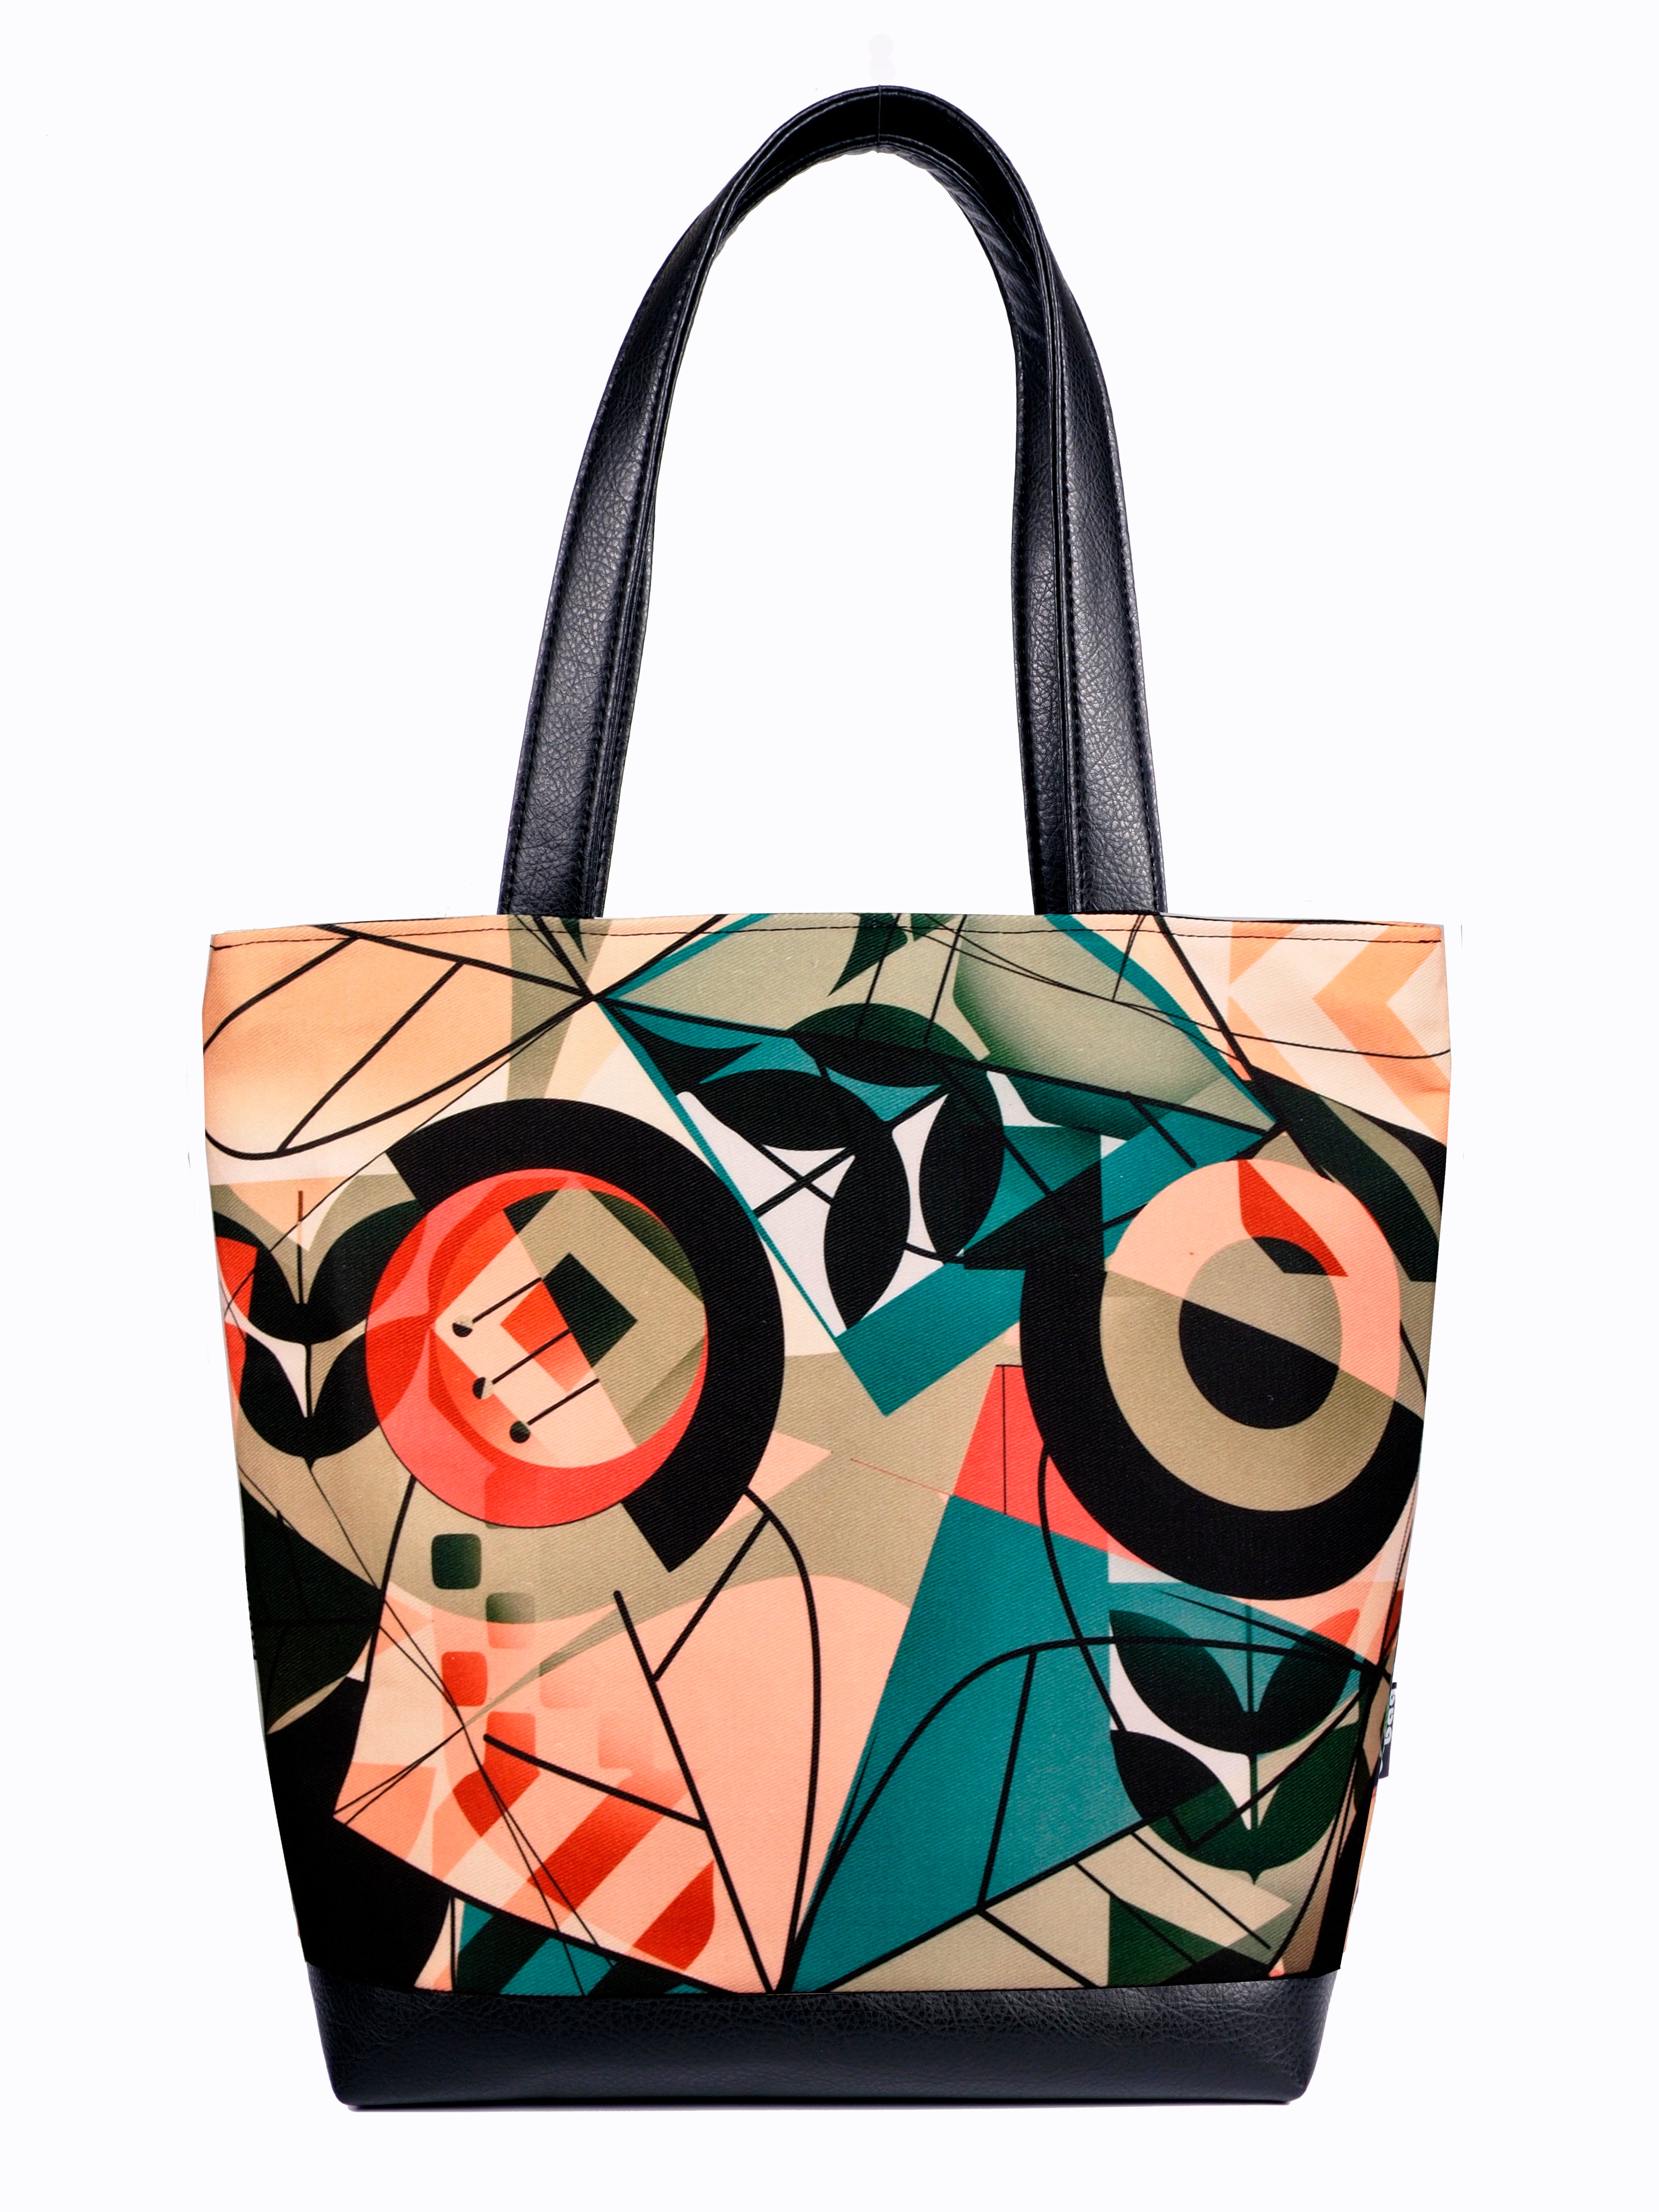 Bardo large tote bag - Geometric flowers - variation - Premium large tote bag from Bardo bag - Just lvabstract, art bag, black, floral, flower, geometric abstraction, gift, green, handemade, large, nature, pink, purple, red, tablet, tote bag, tulips, vegan leather, woman, work bag89.00! Shop now at BARDO ART WORKS